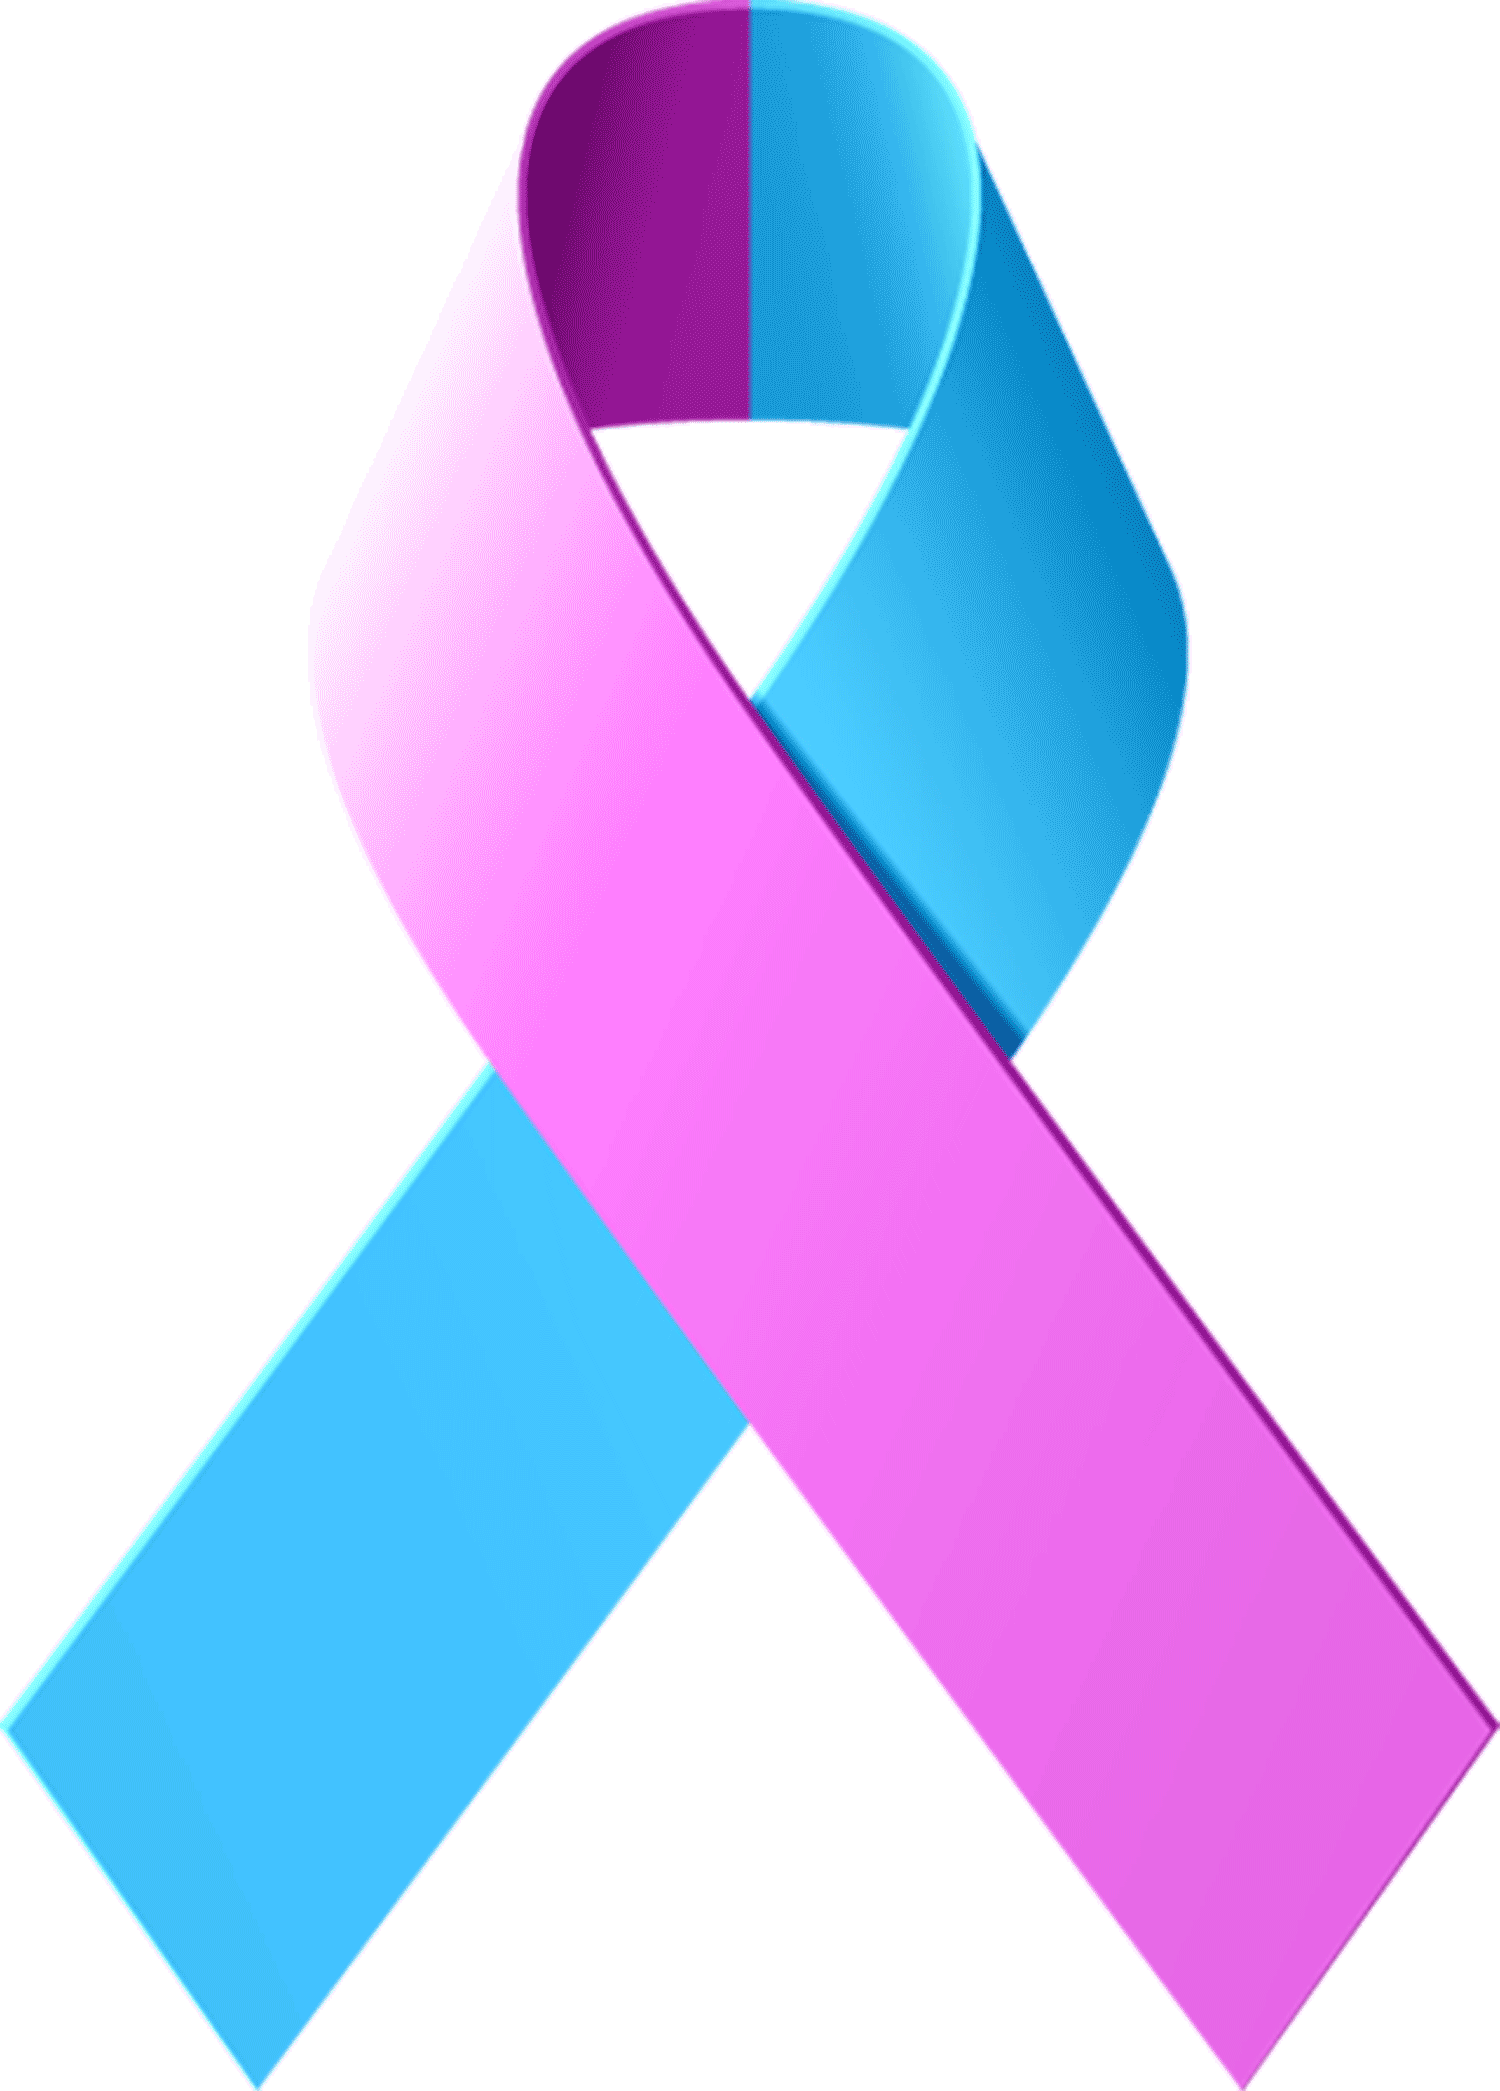 Symptoms of male breast cancer - Male breast cancer is most common in older men, but it is important that men recognize that the disease can strike them at any age. #BreastCancer #MaleBreastCancer